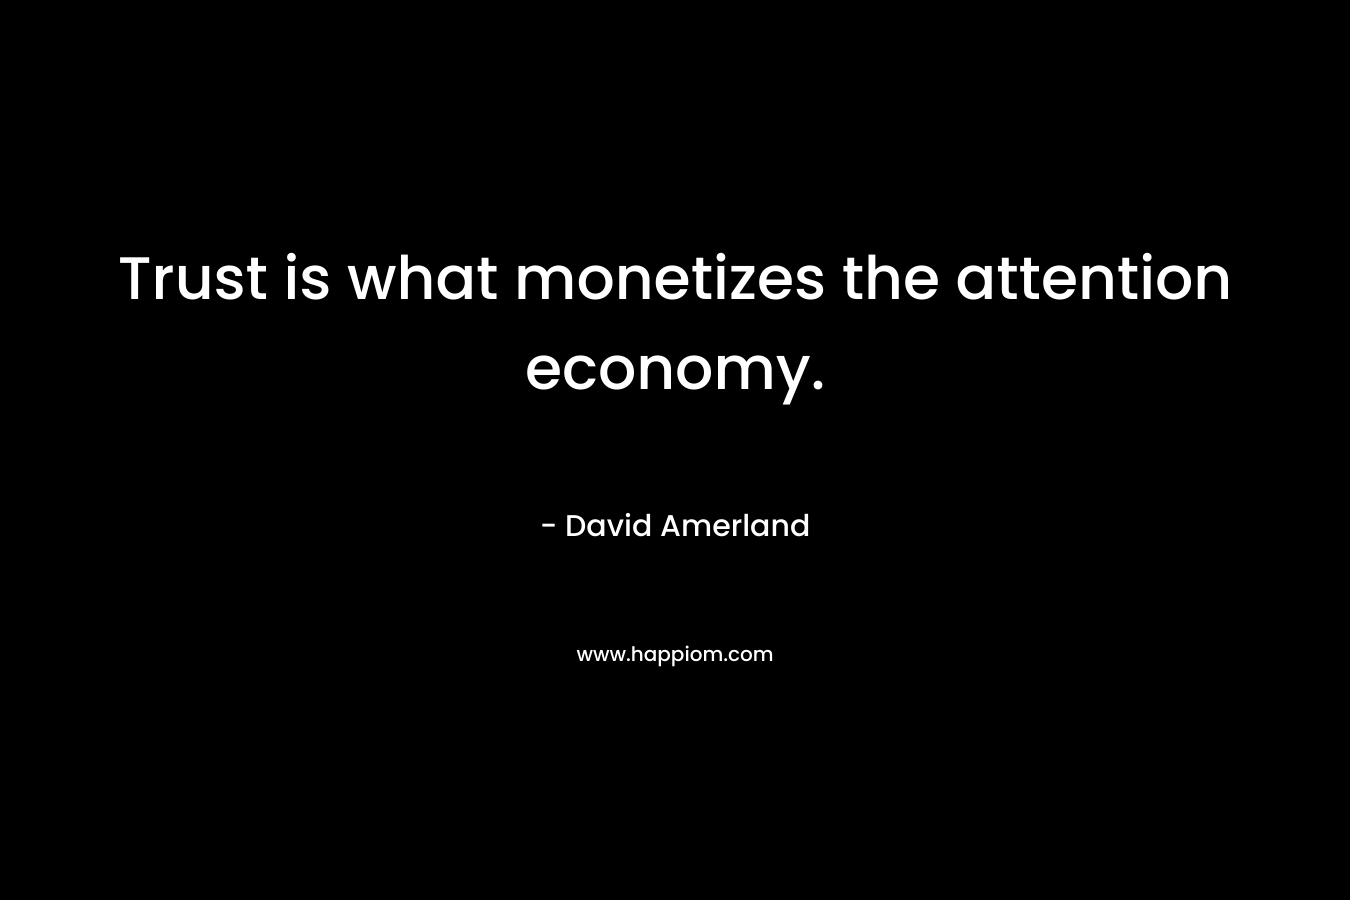 Trust is what monetizes the attention economy. – David Amerland